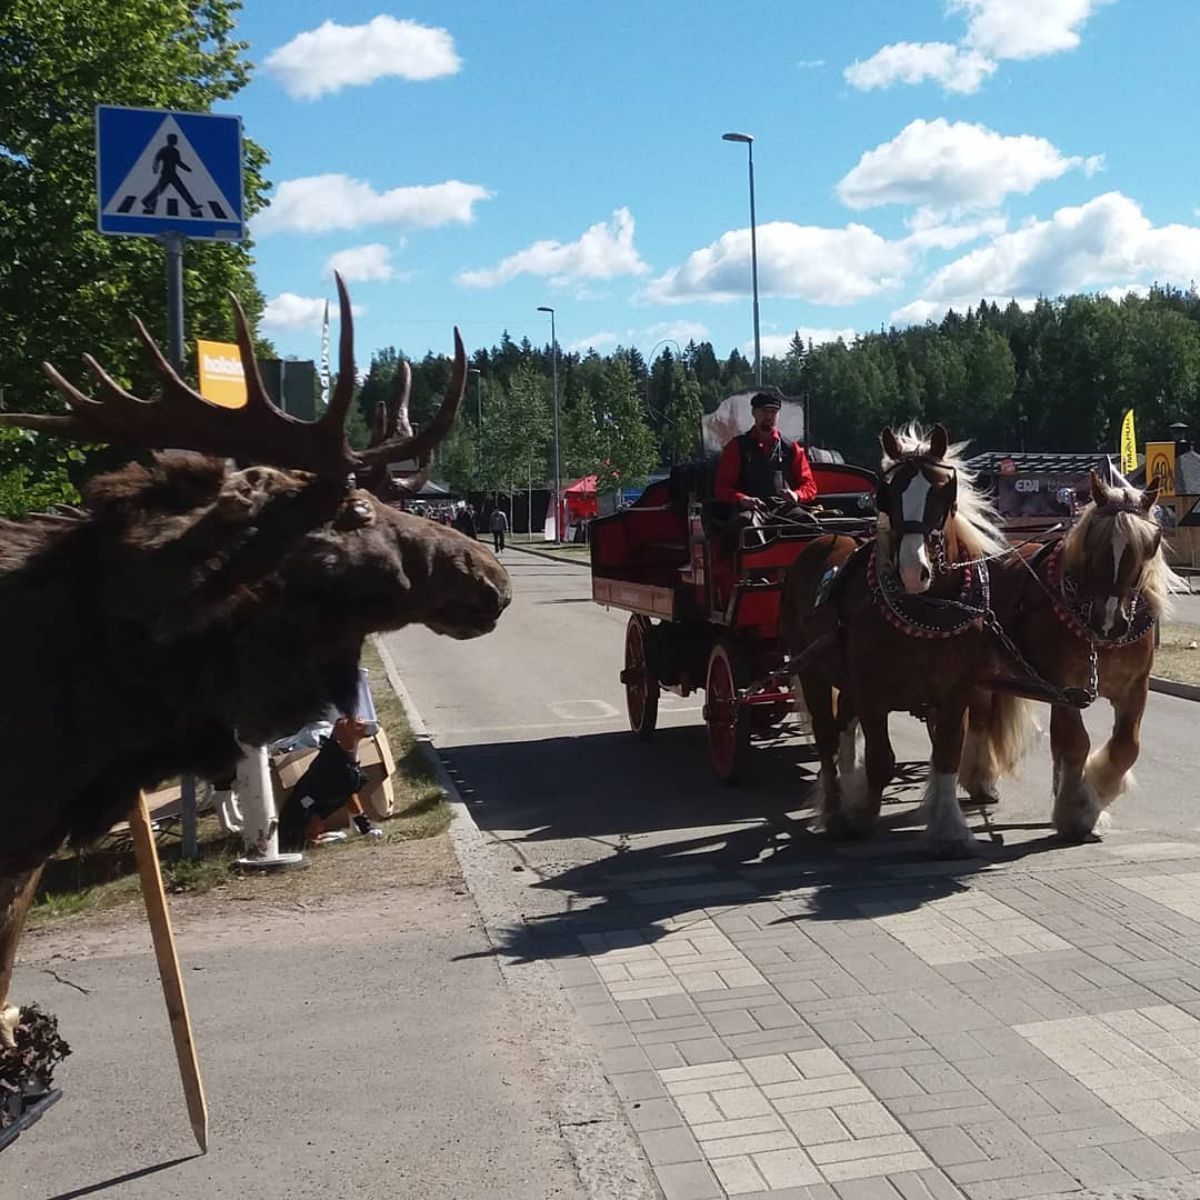 A moose watchning horses pulling a carriage on a street.